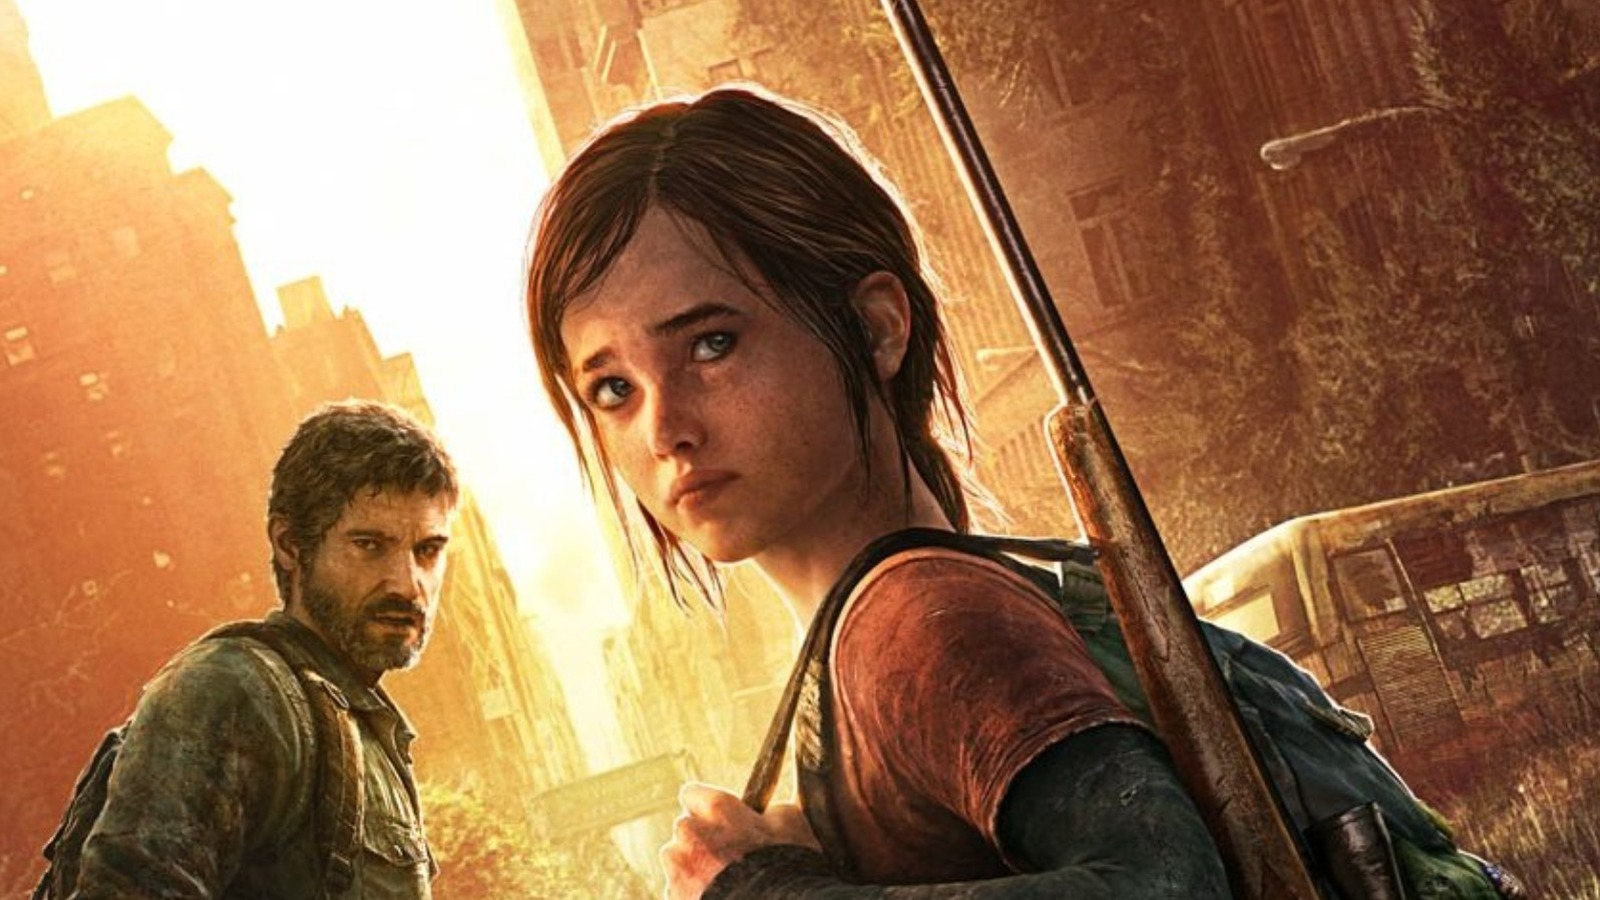 The Last Of Us Part 3 coming way sooner than expected, says insider